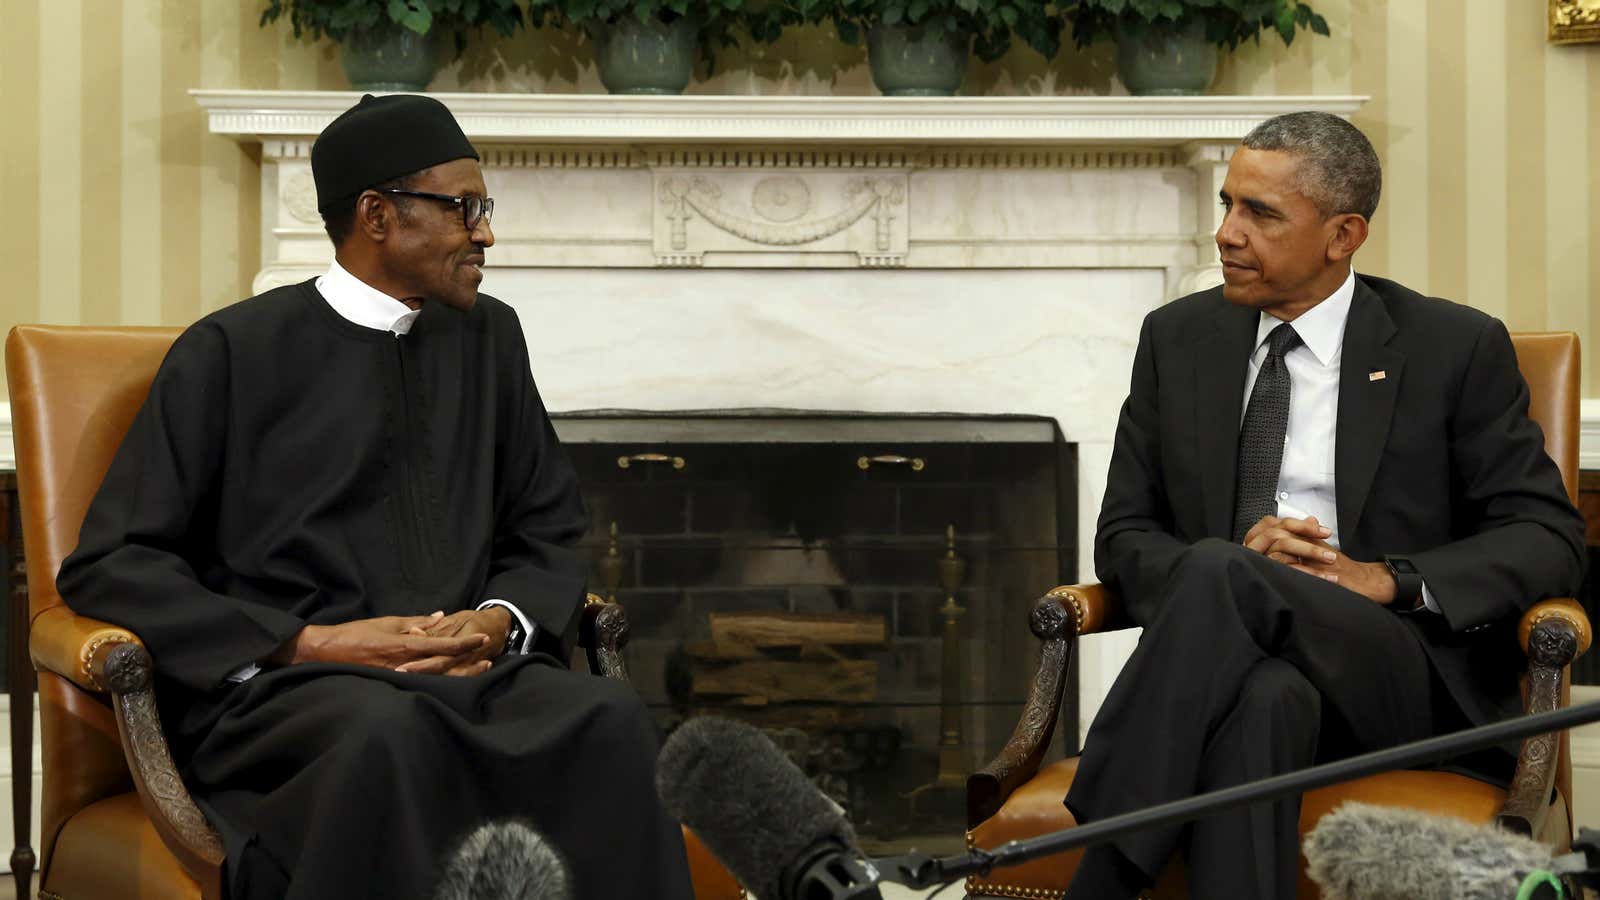 Buhari meets Obama at the Oval Office.